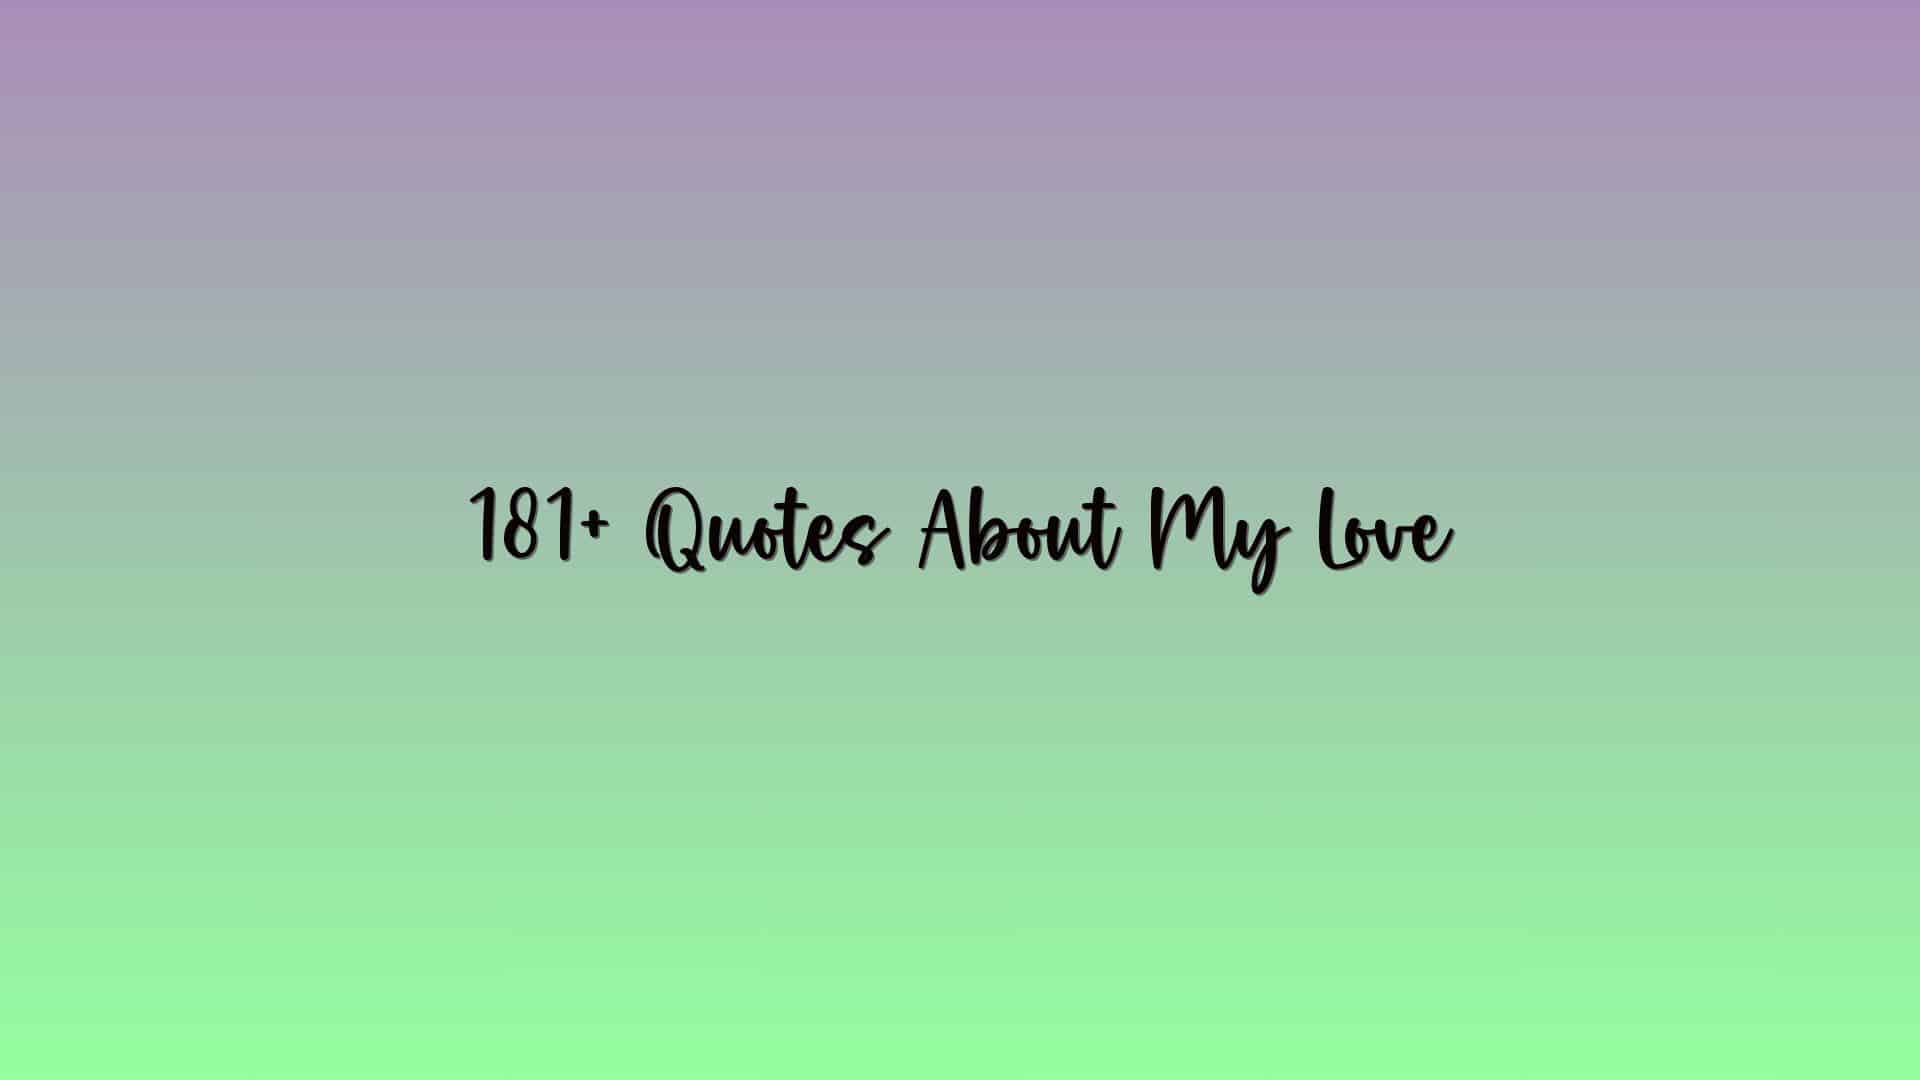 181+ Quotes About My Love